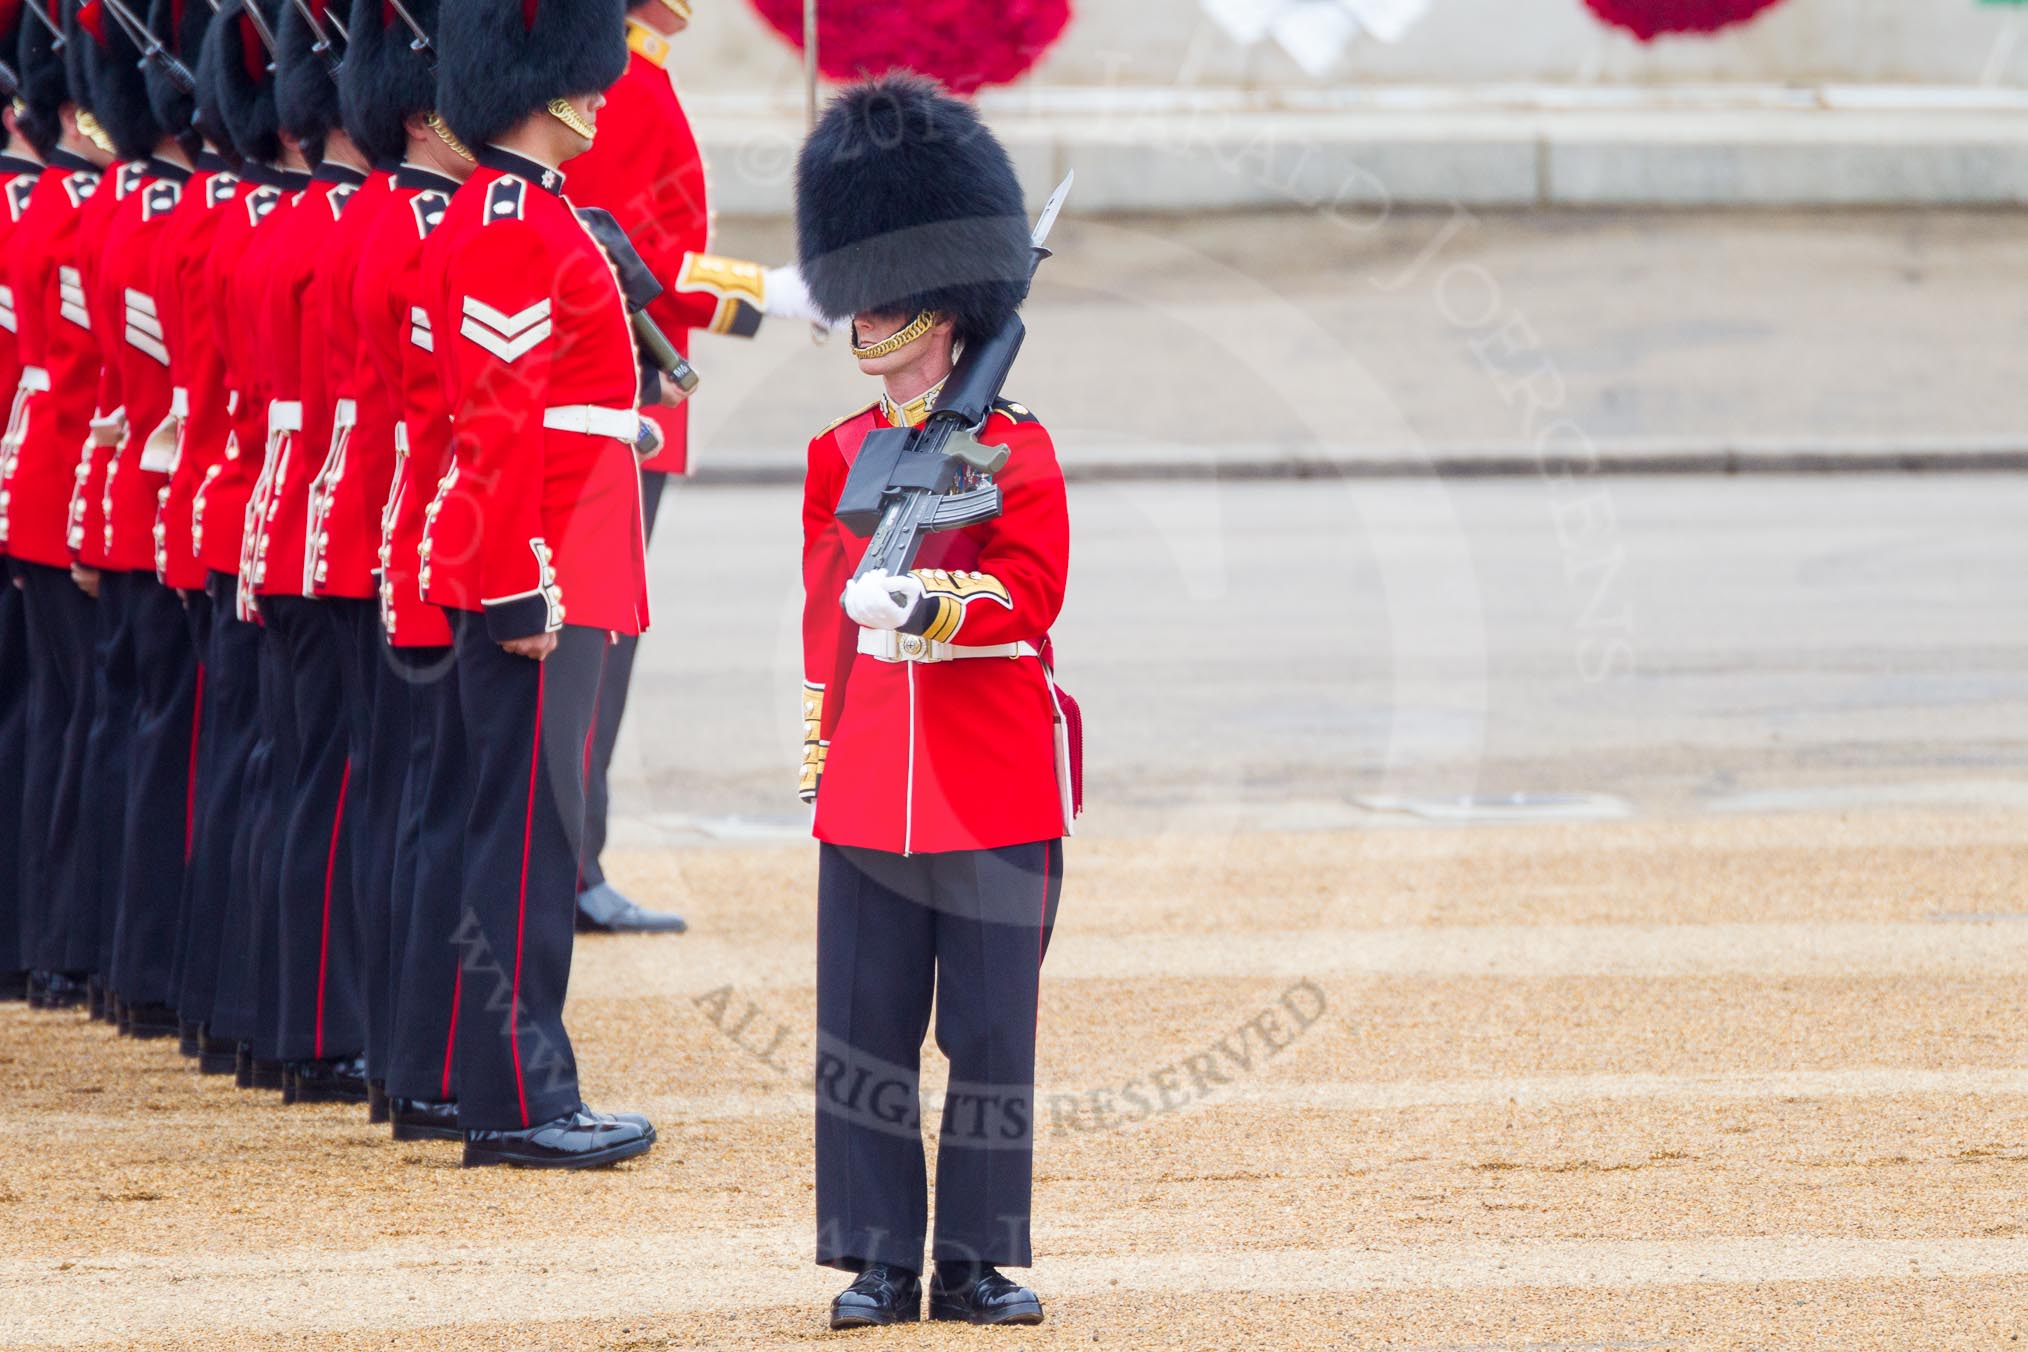 The Colonel's Review 2016.
Horse Guards Parade, Westminster,
London,

United Kingdom,
on 04 June 2016 at 10:44, image #122